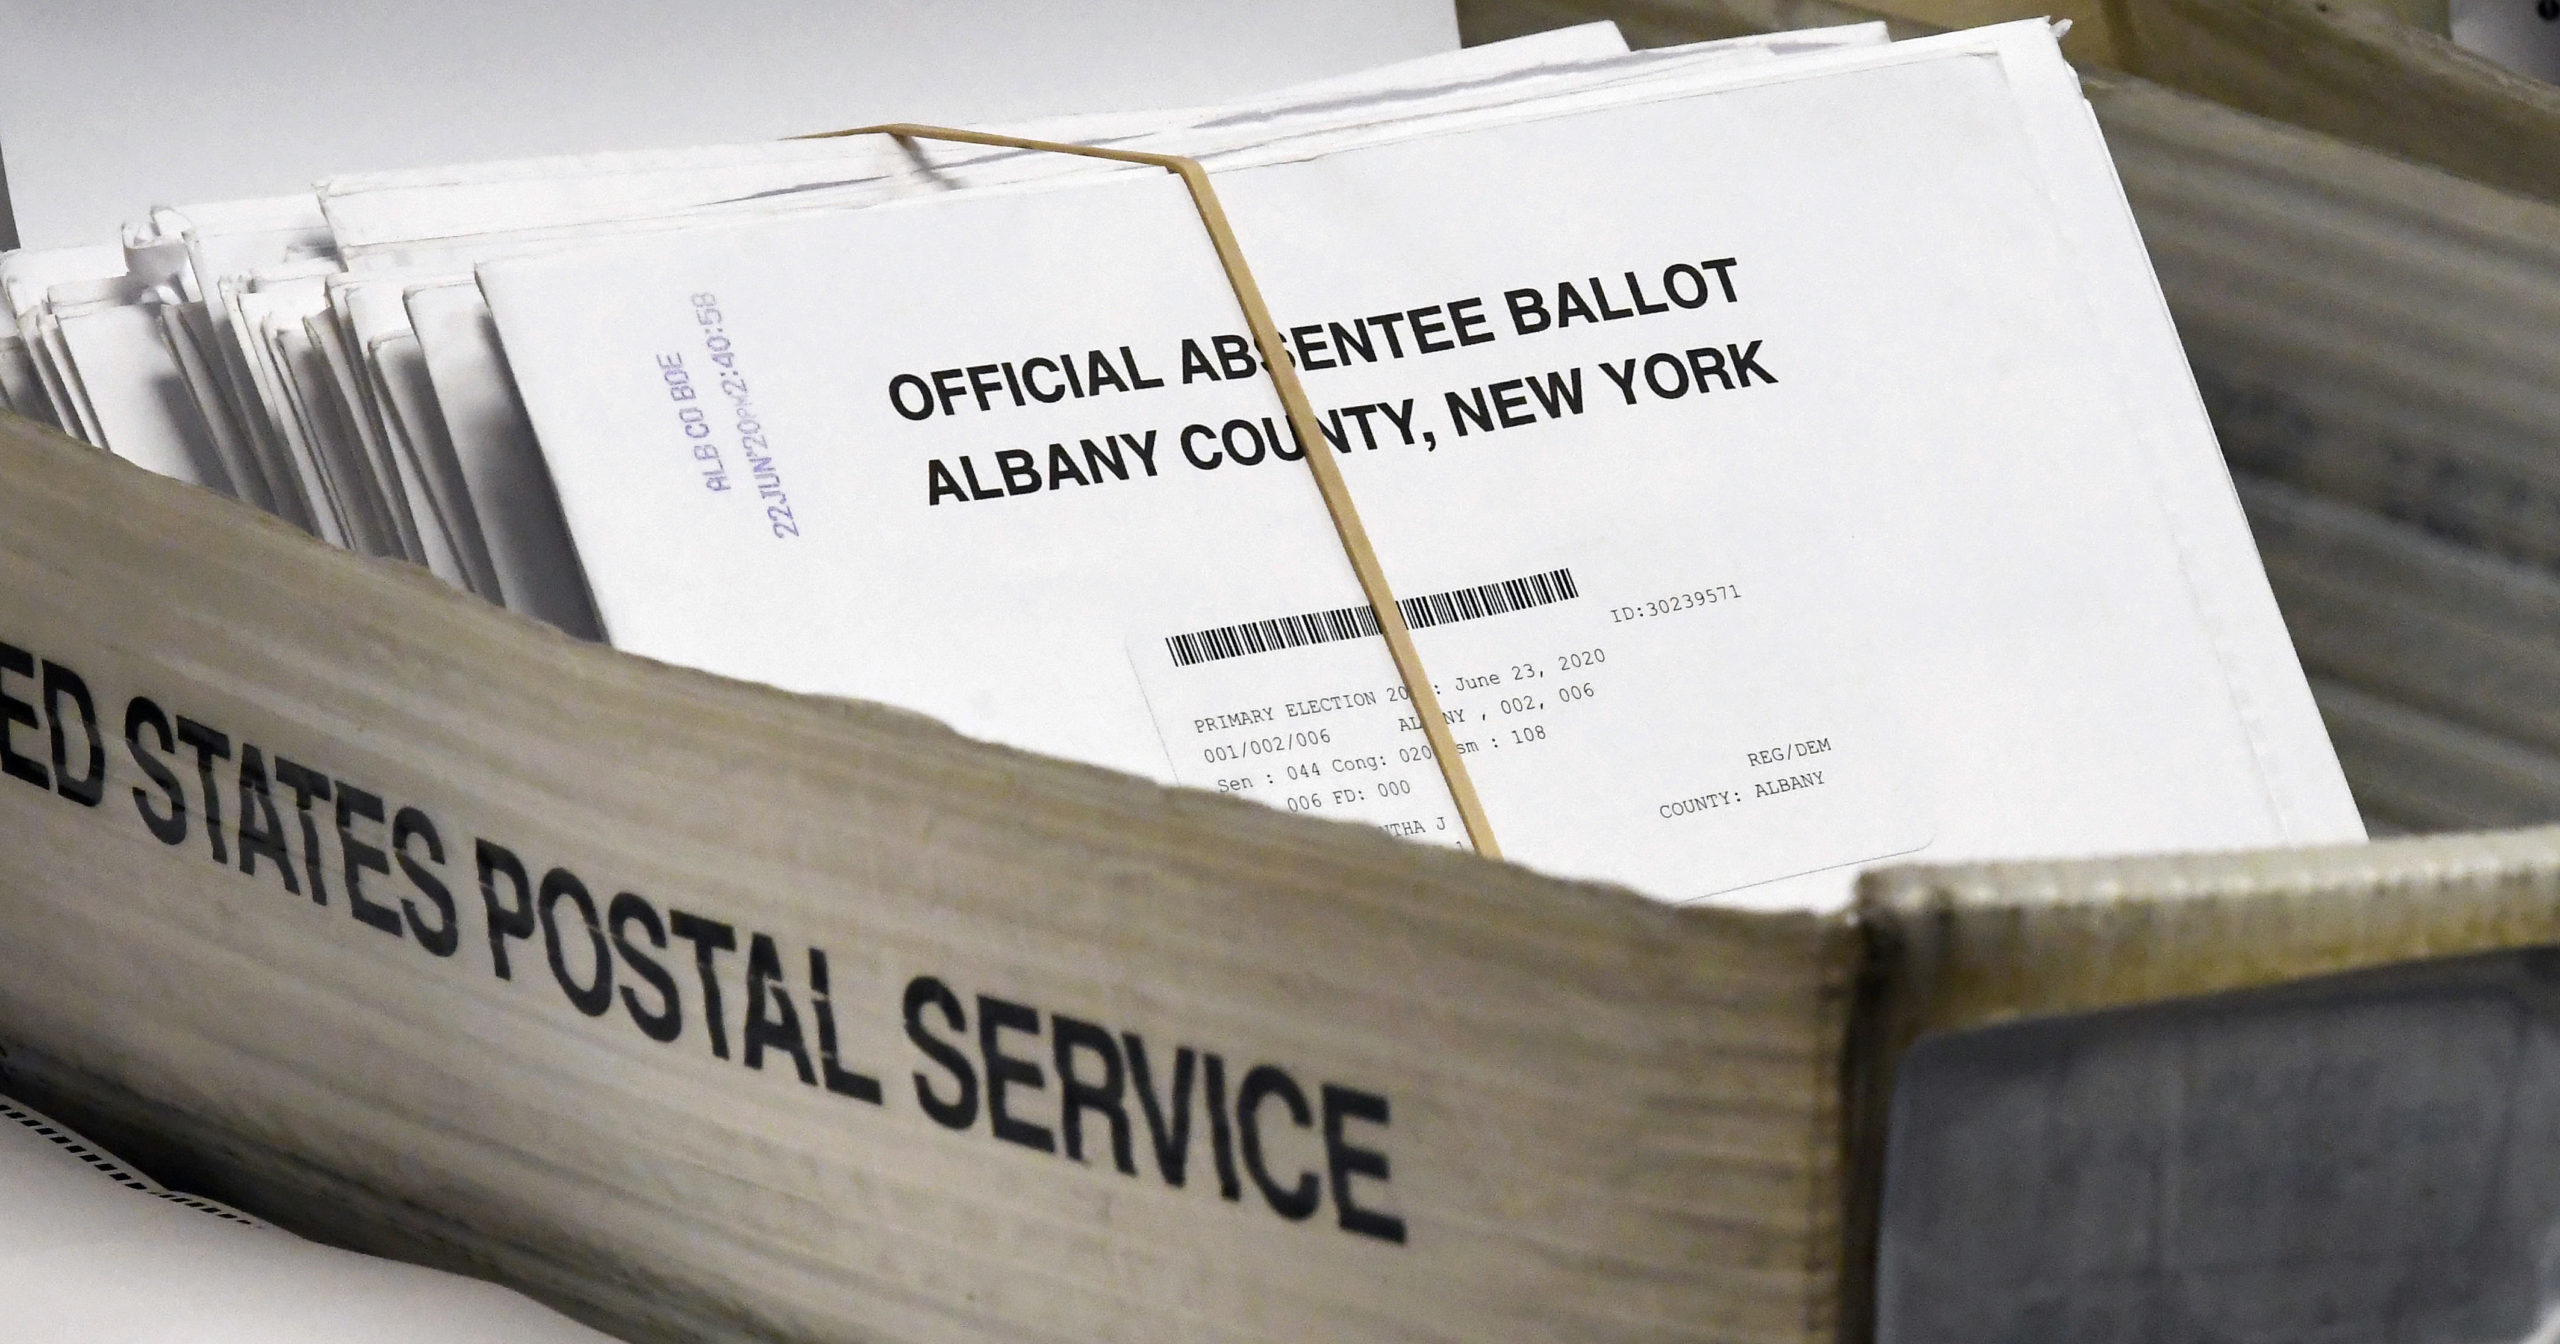 In this June 30, 2020, file photo, absentee ballots wait to be counted at the Albany County Board of Elections in Albany, New York. New York will allow voters to request absentee ballots for the general election because of the coronavirus under a new state law signed by Gov. Andrew Cuomo on Aug. 20.